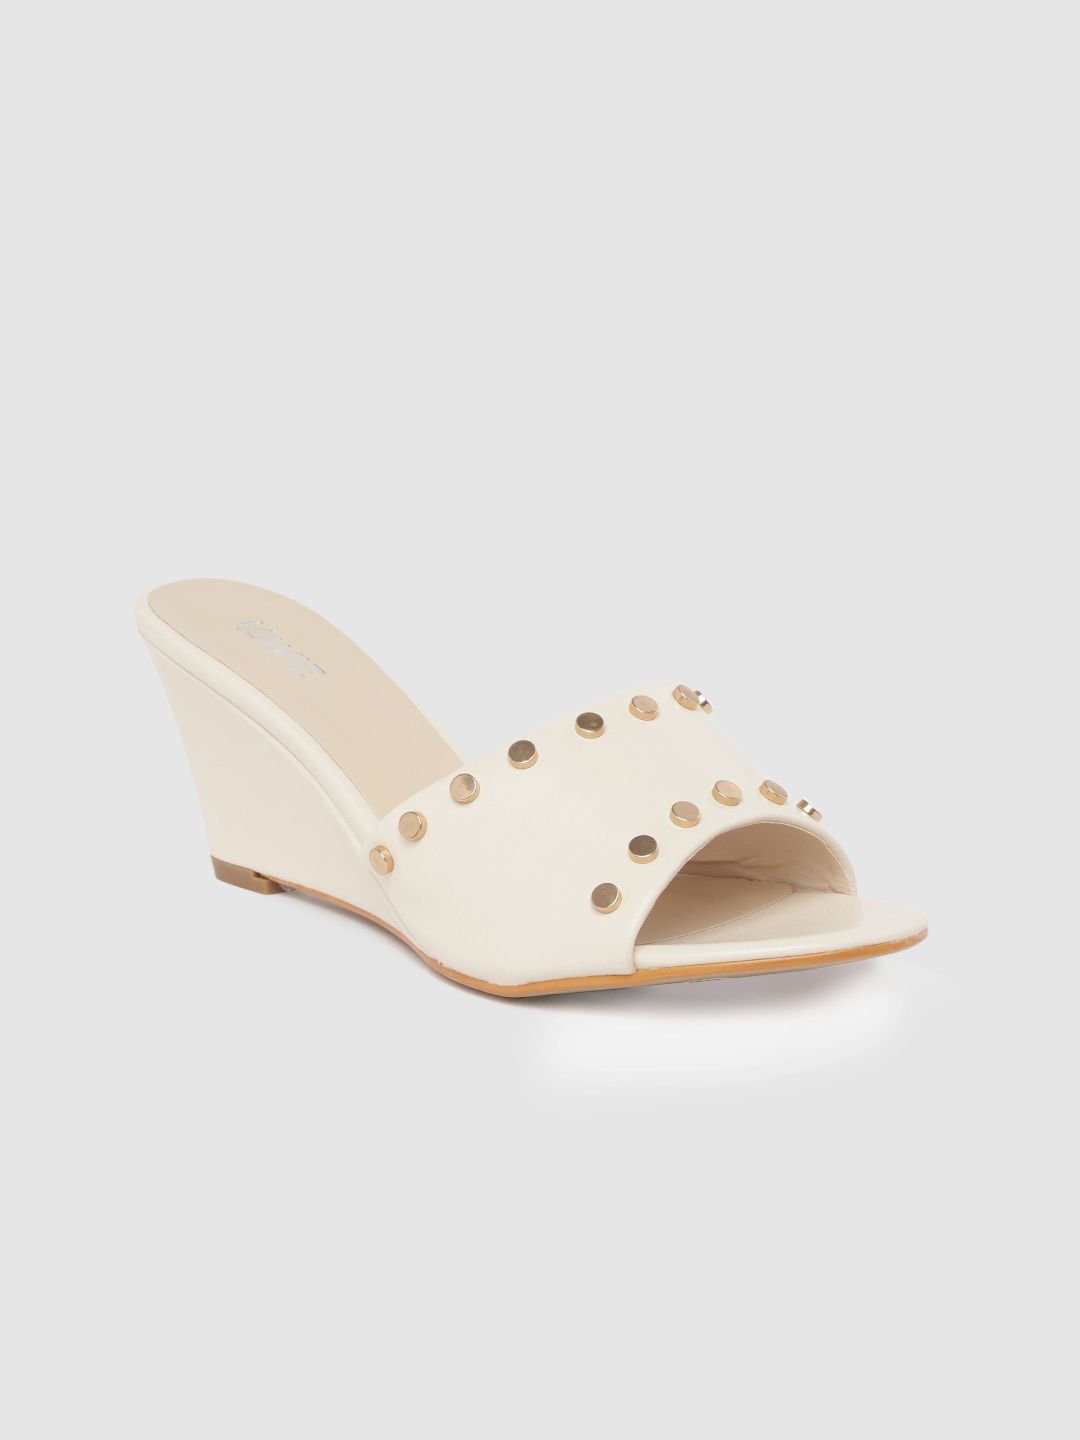 Lavie Women Off-White Solid Wedges with Metallic Studs Detail Price in India